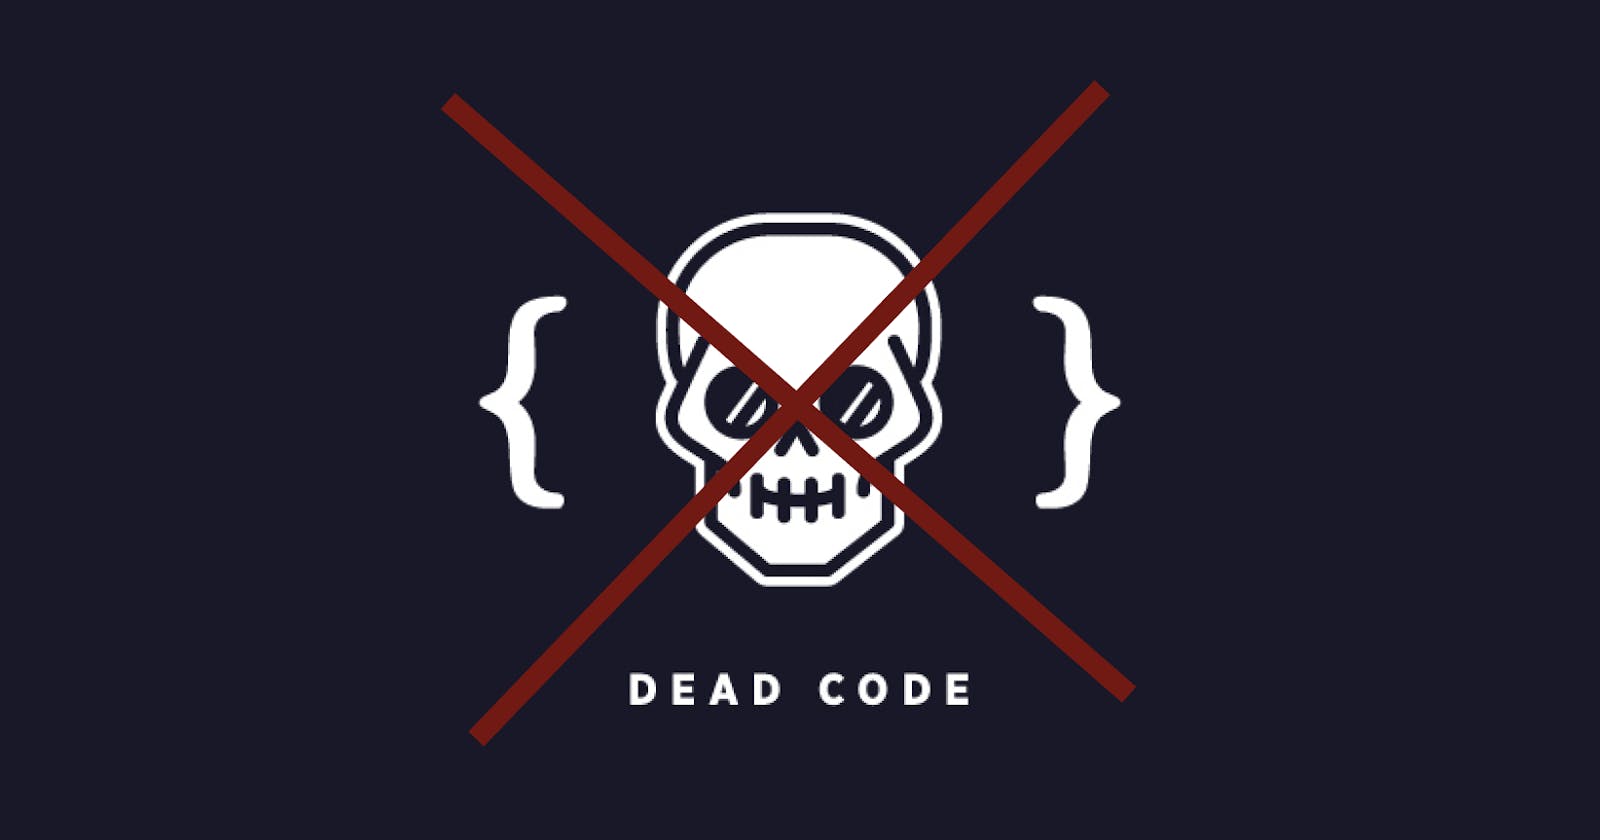 Importance of removing Dead codes